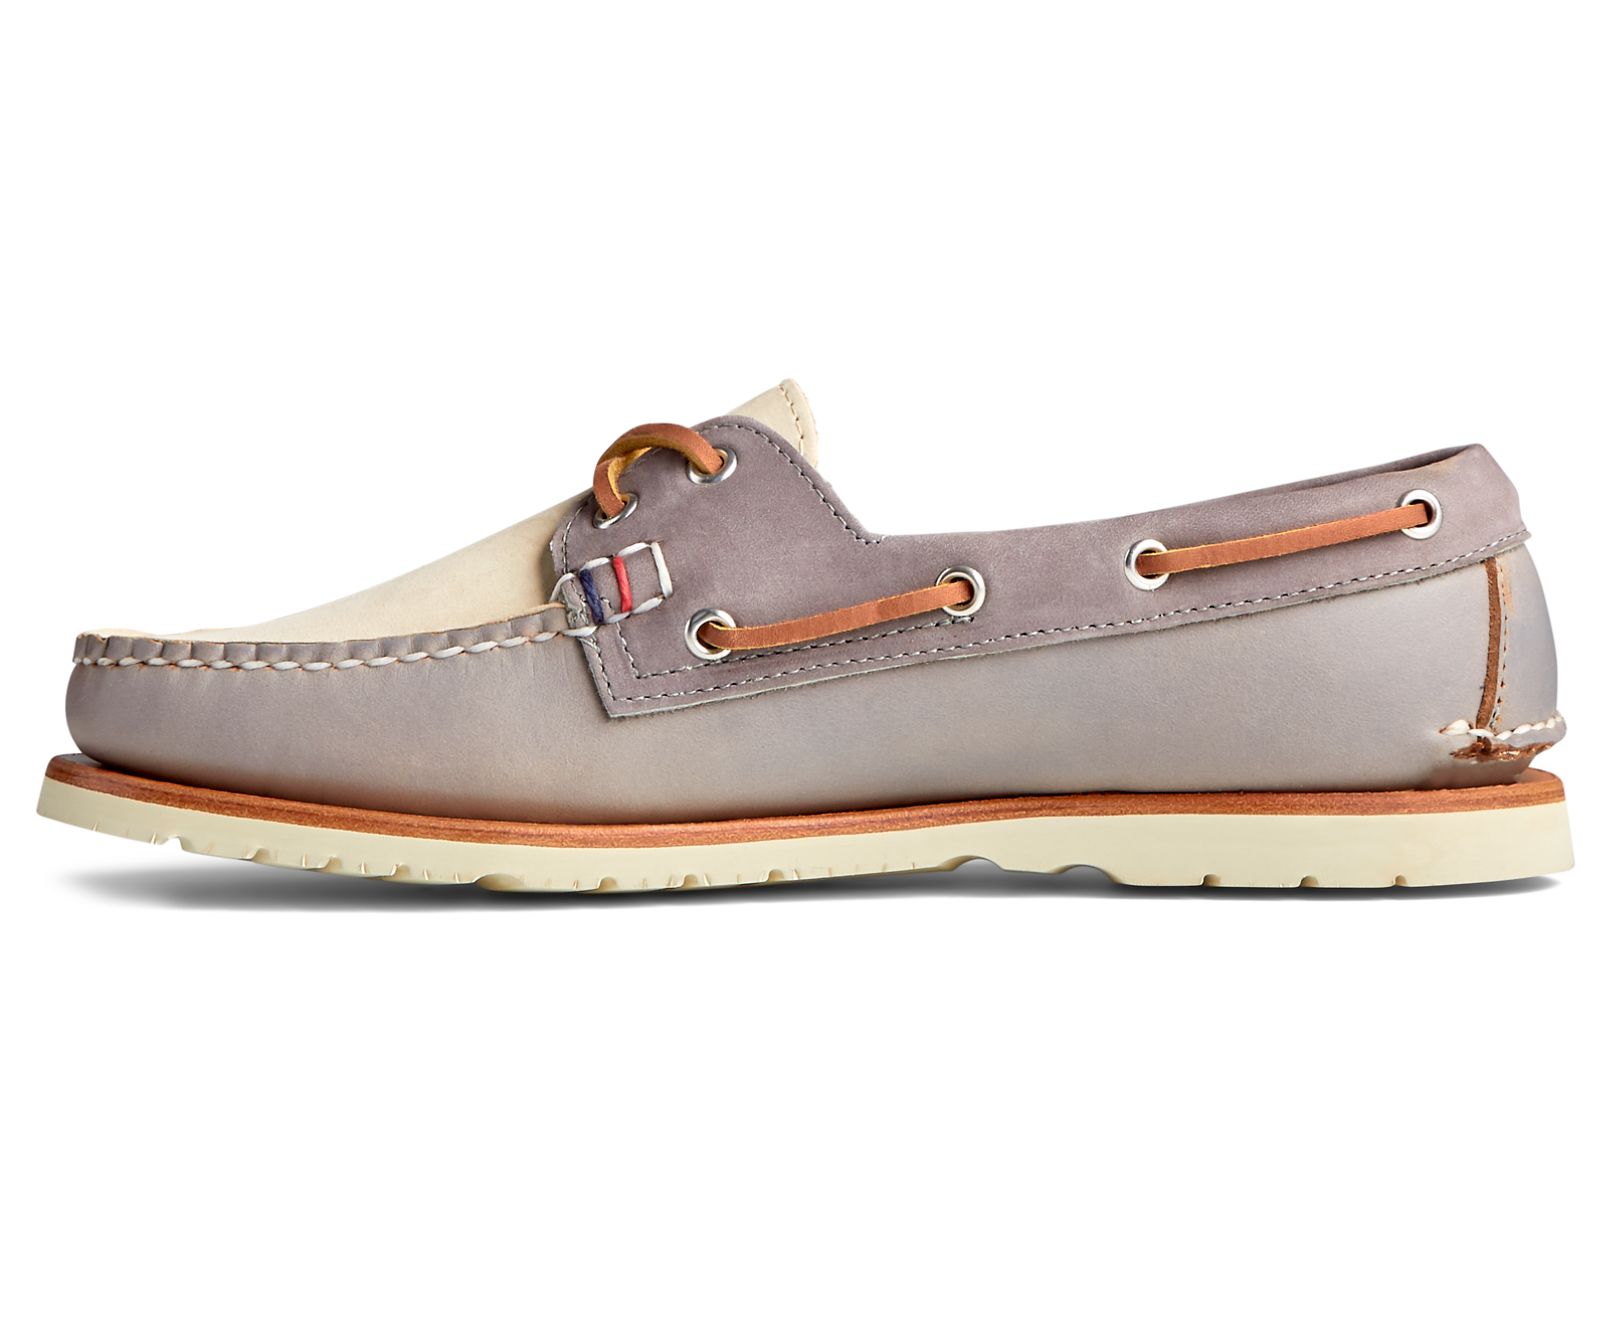 Men's Gold Cup Handcrafted in Maine Boat Shoe - Grey Tri-Tone